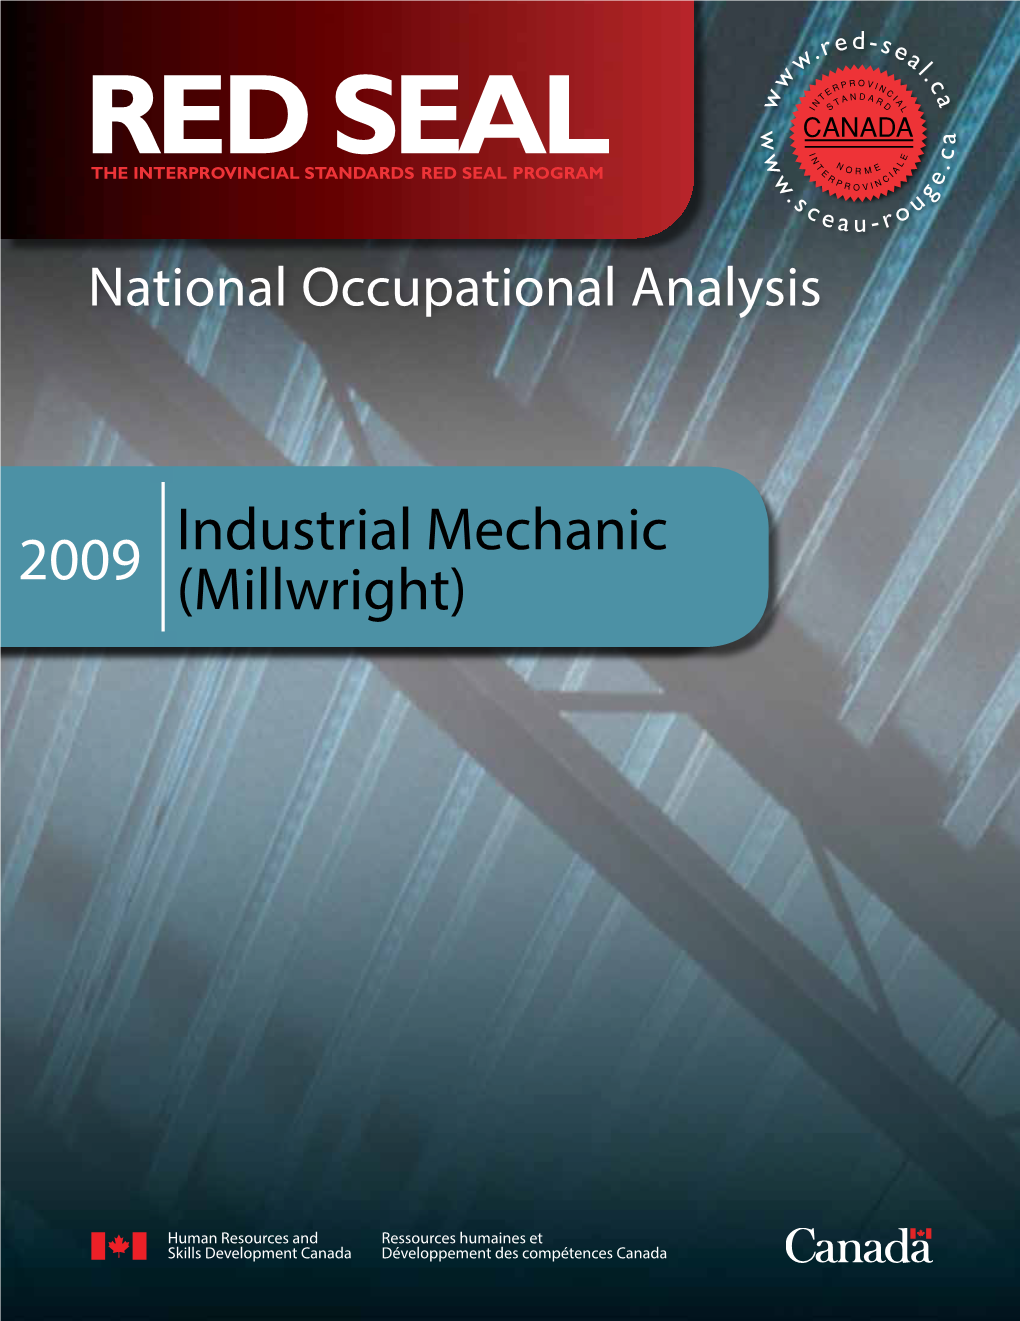 Industrial Mechanic (Millwright) Human Resources and Human Resources Skills Canada Development National Occupational Analysis Occupational National 2009